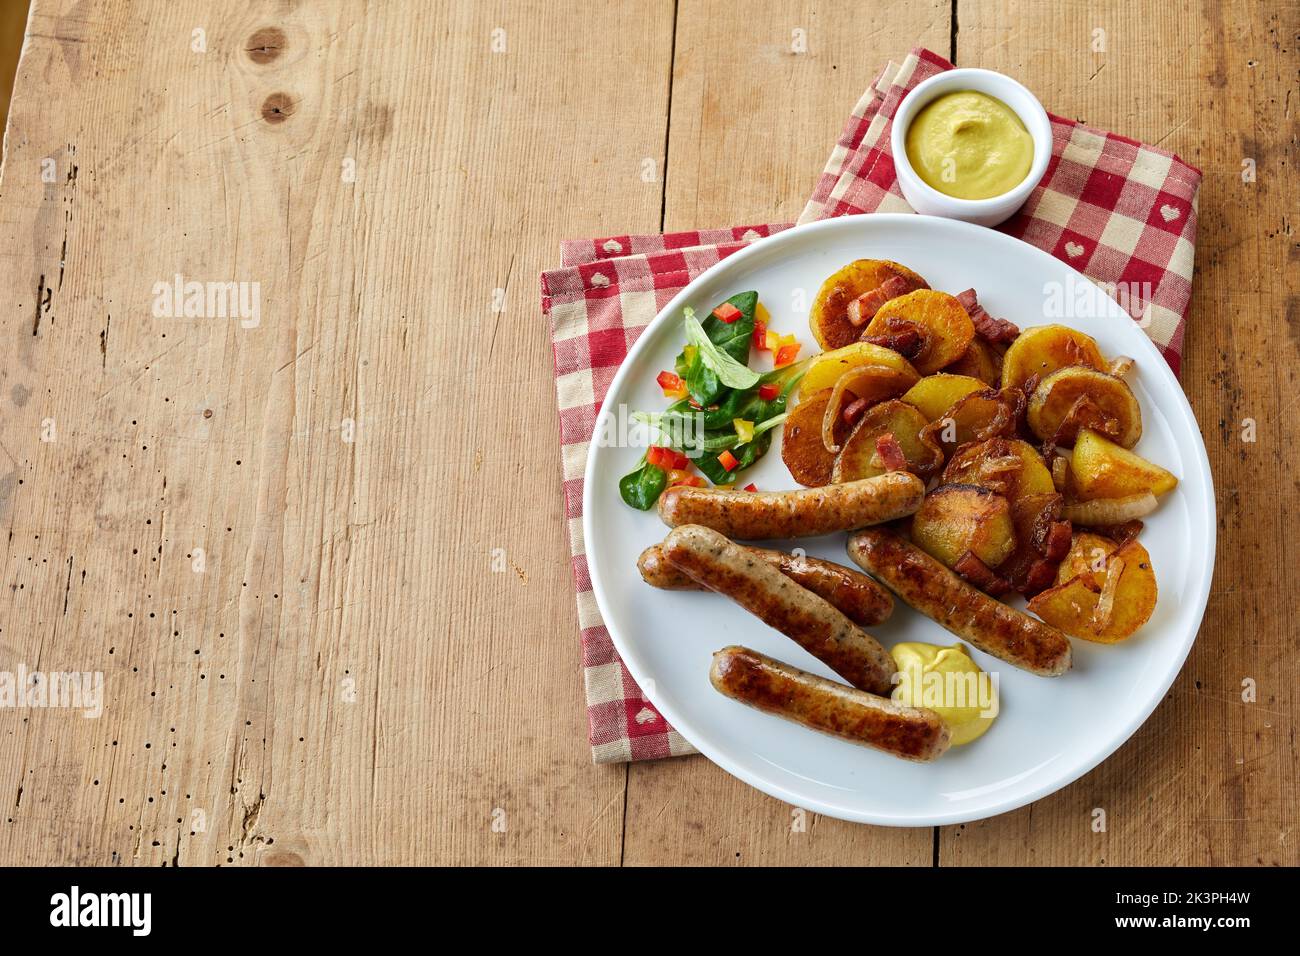 Top view of plate of bratwurst and bratkartoffeln with salad served on plate near bowl of mustard sauce and checkered napkin on wooden table Stock Photo